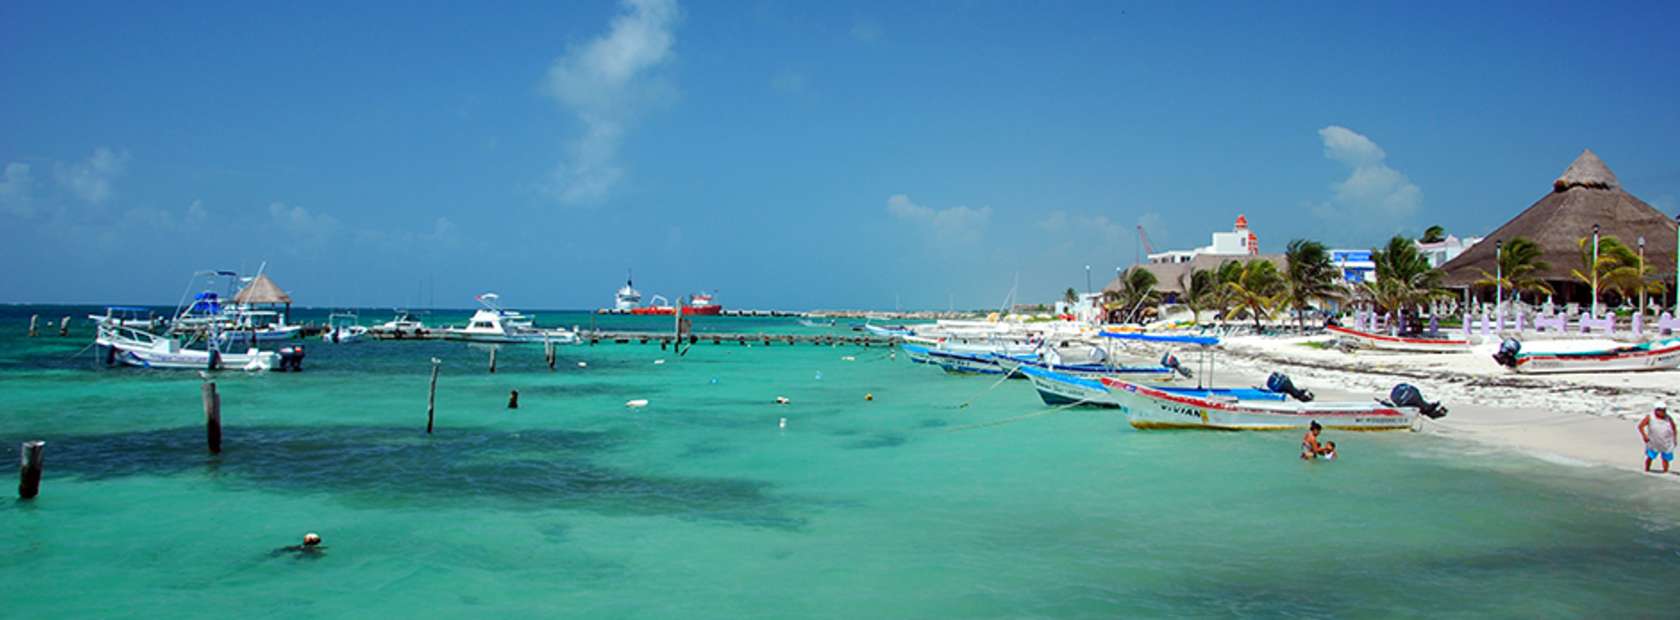 Puerto Morelos Beach with Boats and Resort